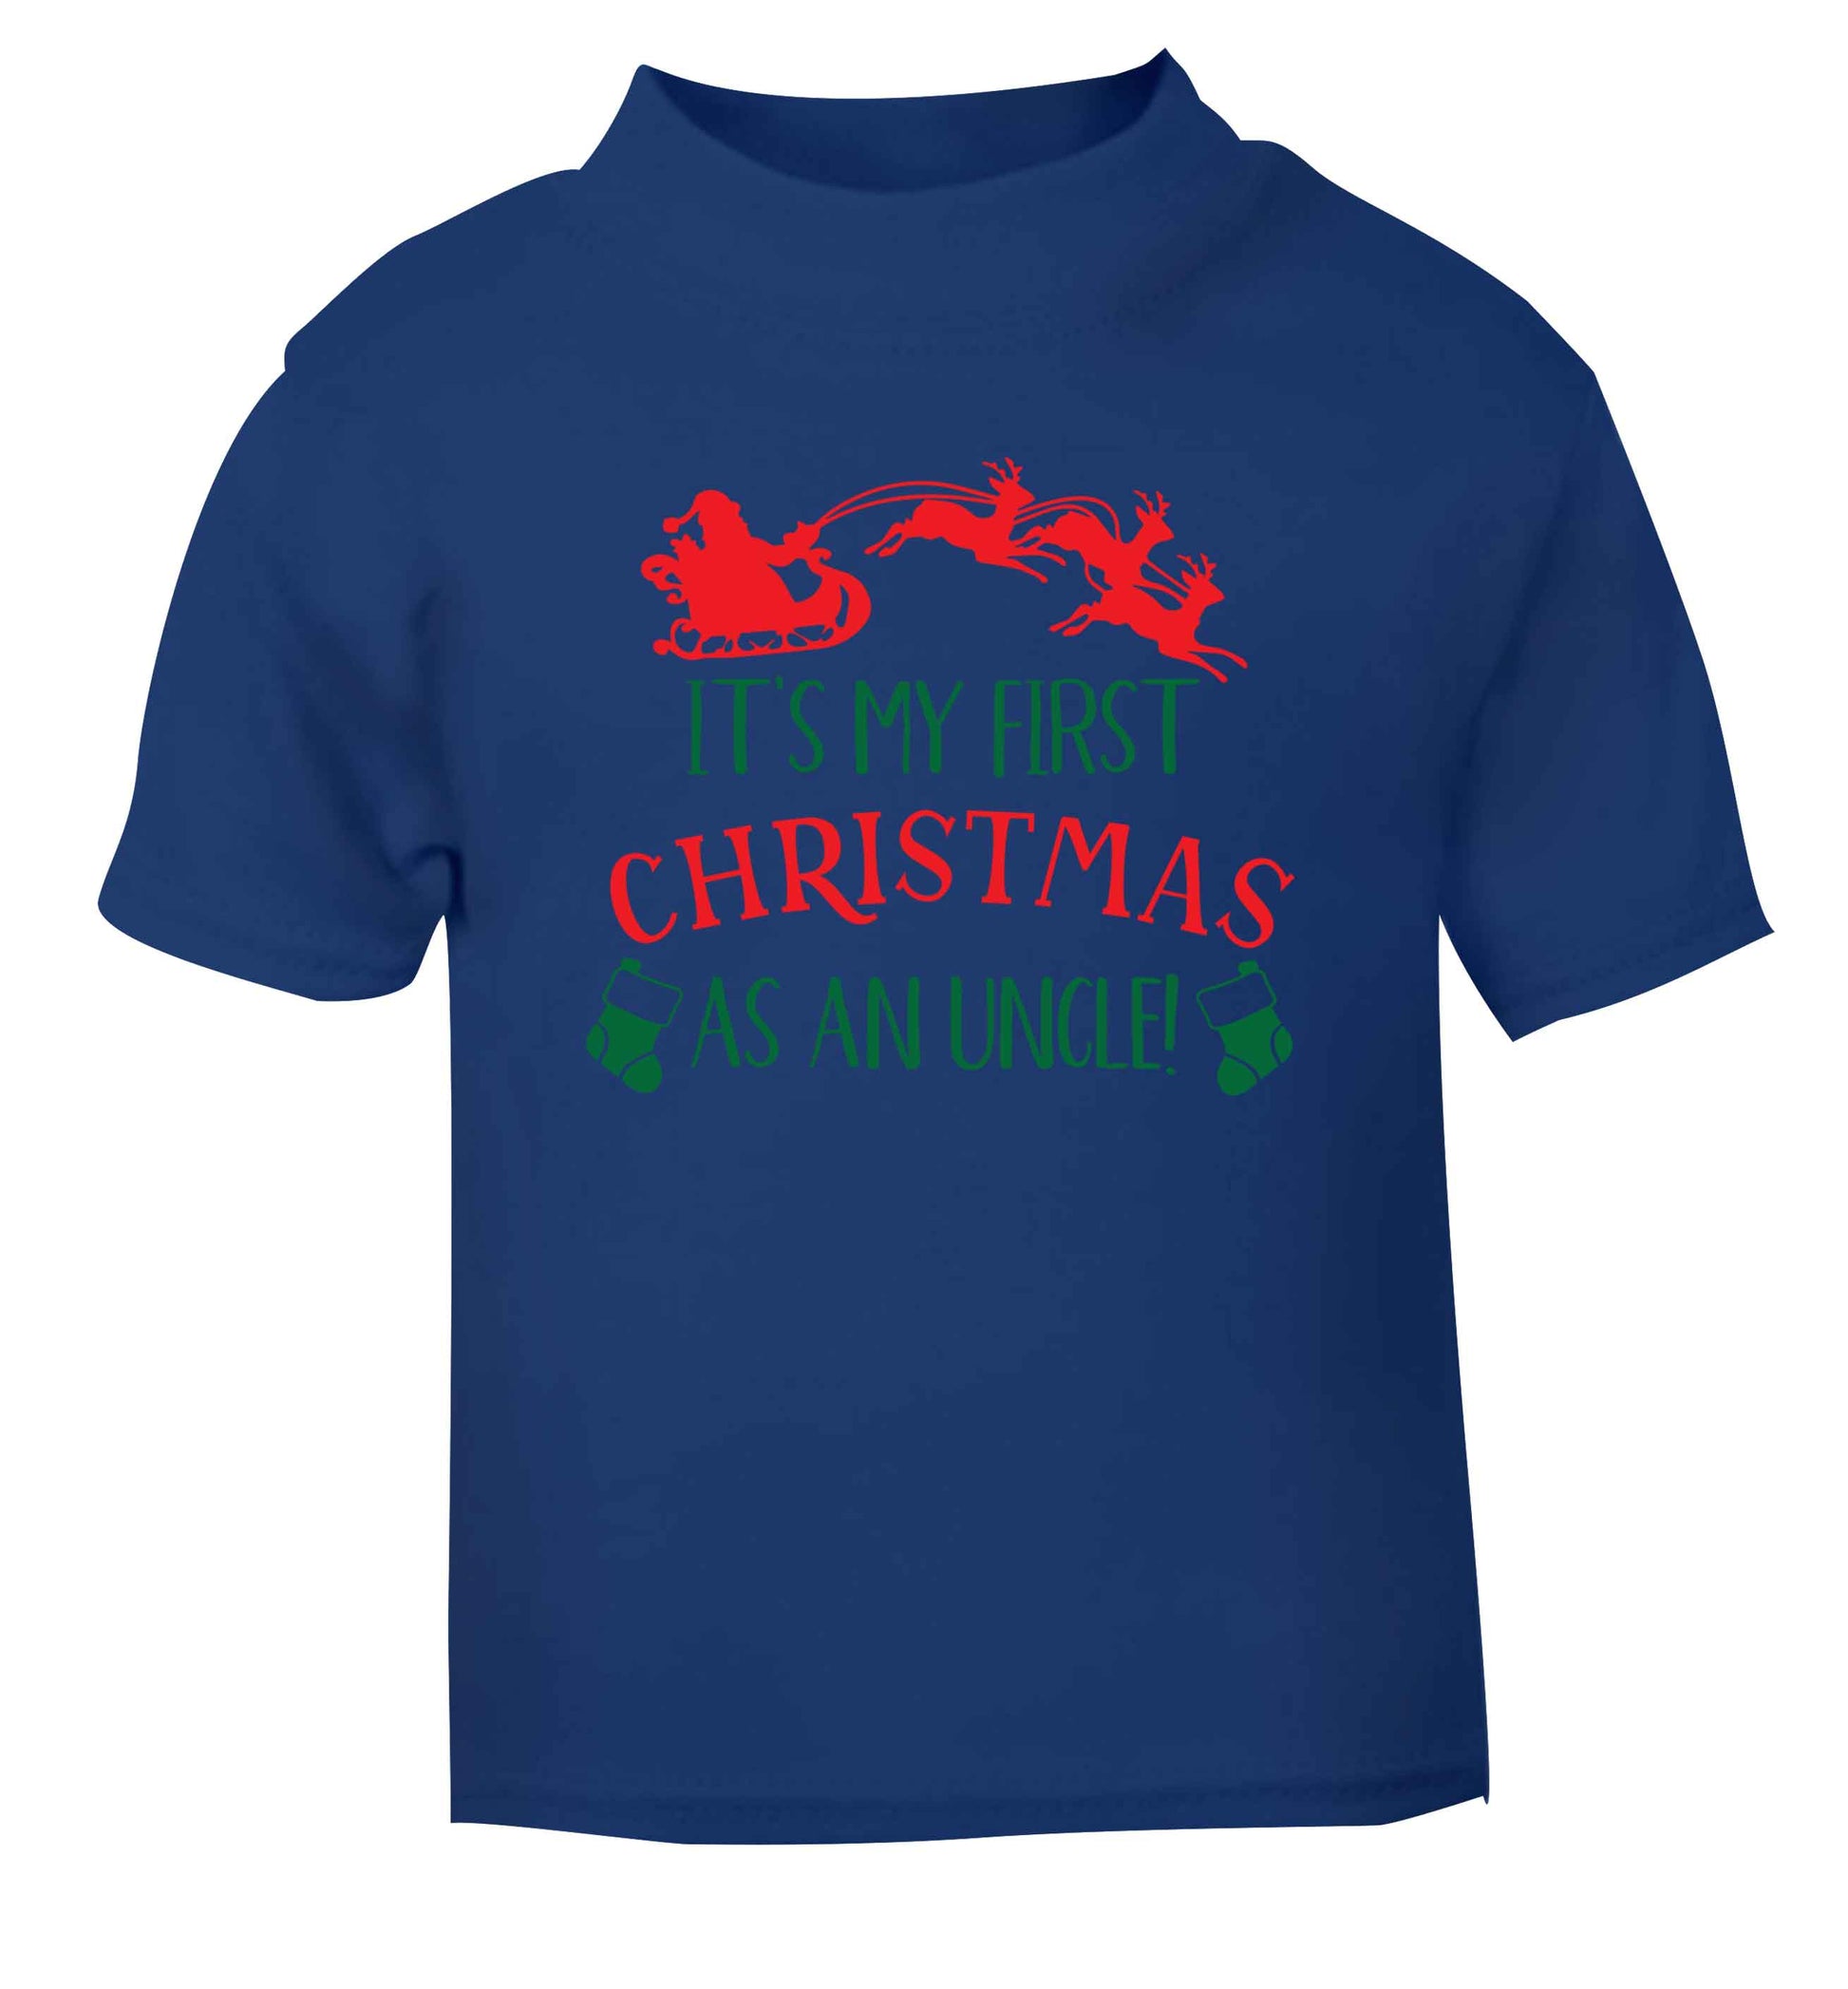 It's my first Christmas as an uncle! blue Baby Toddler Tshirt 2 Years